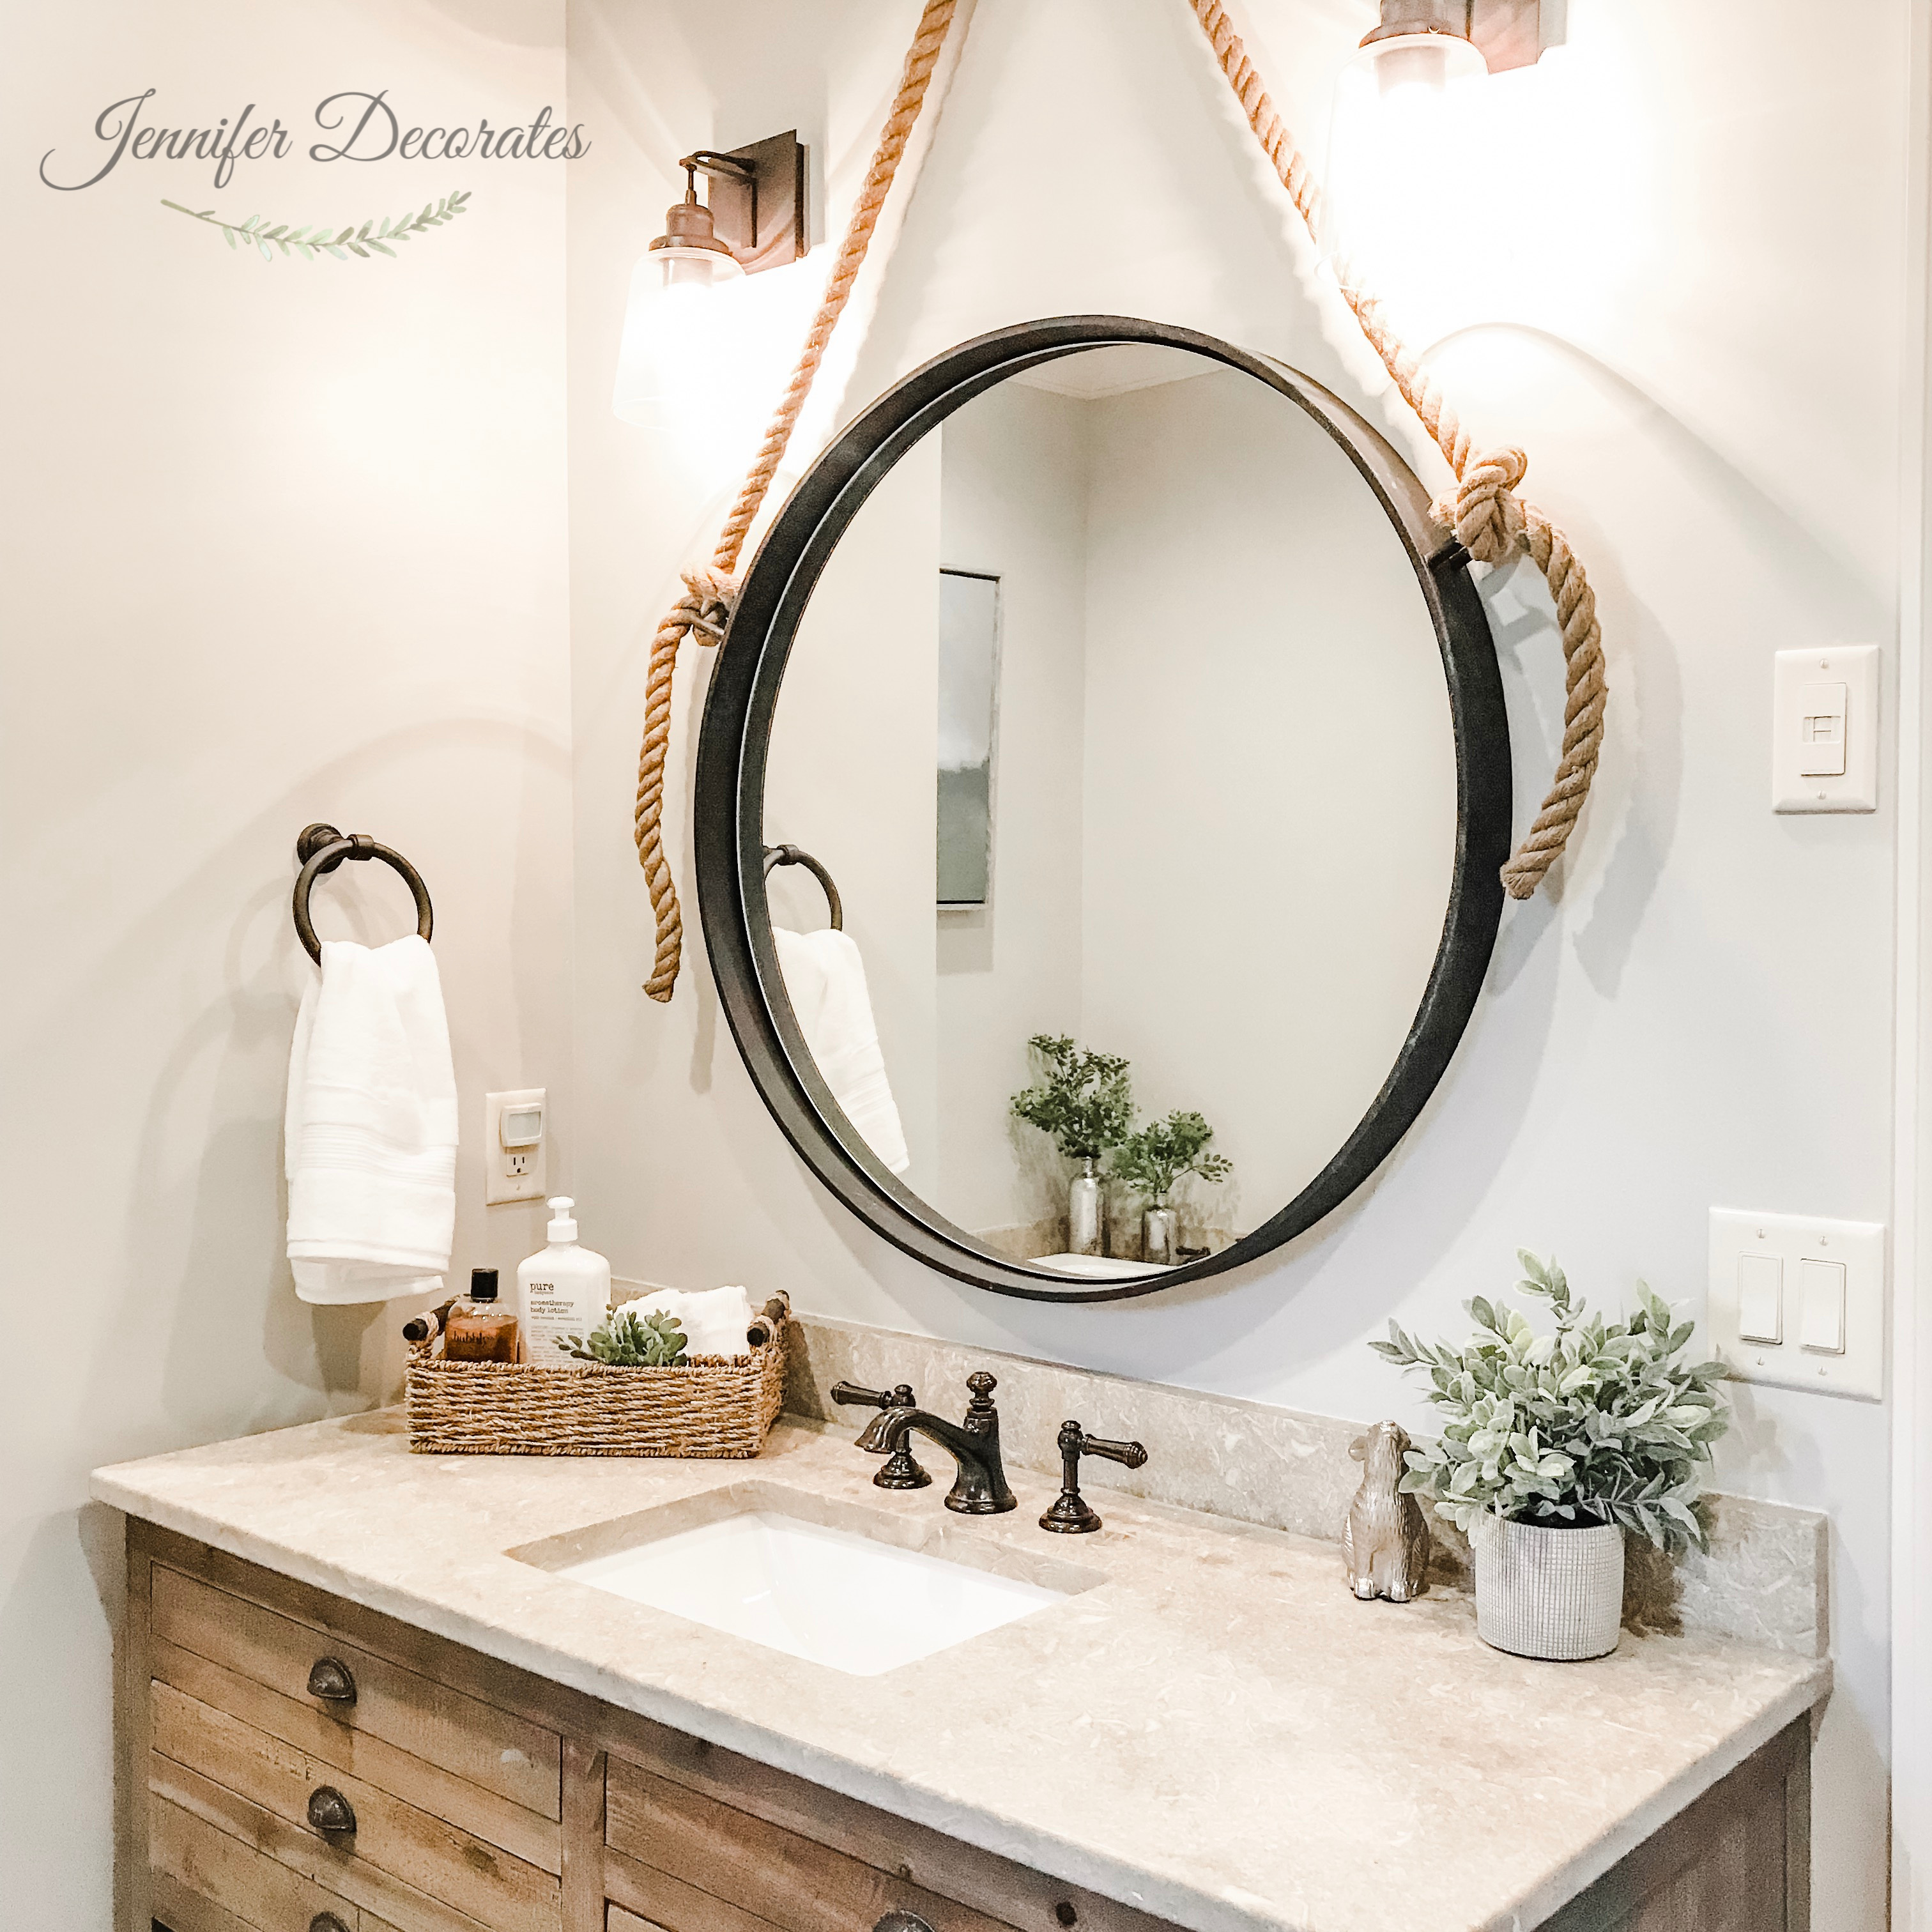 4 Essential tips in helping you decorate a beautiful bathroom. 